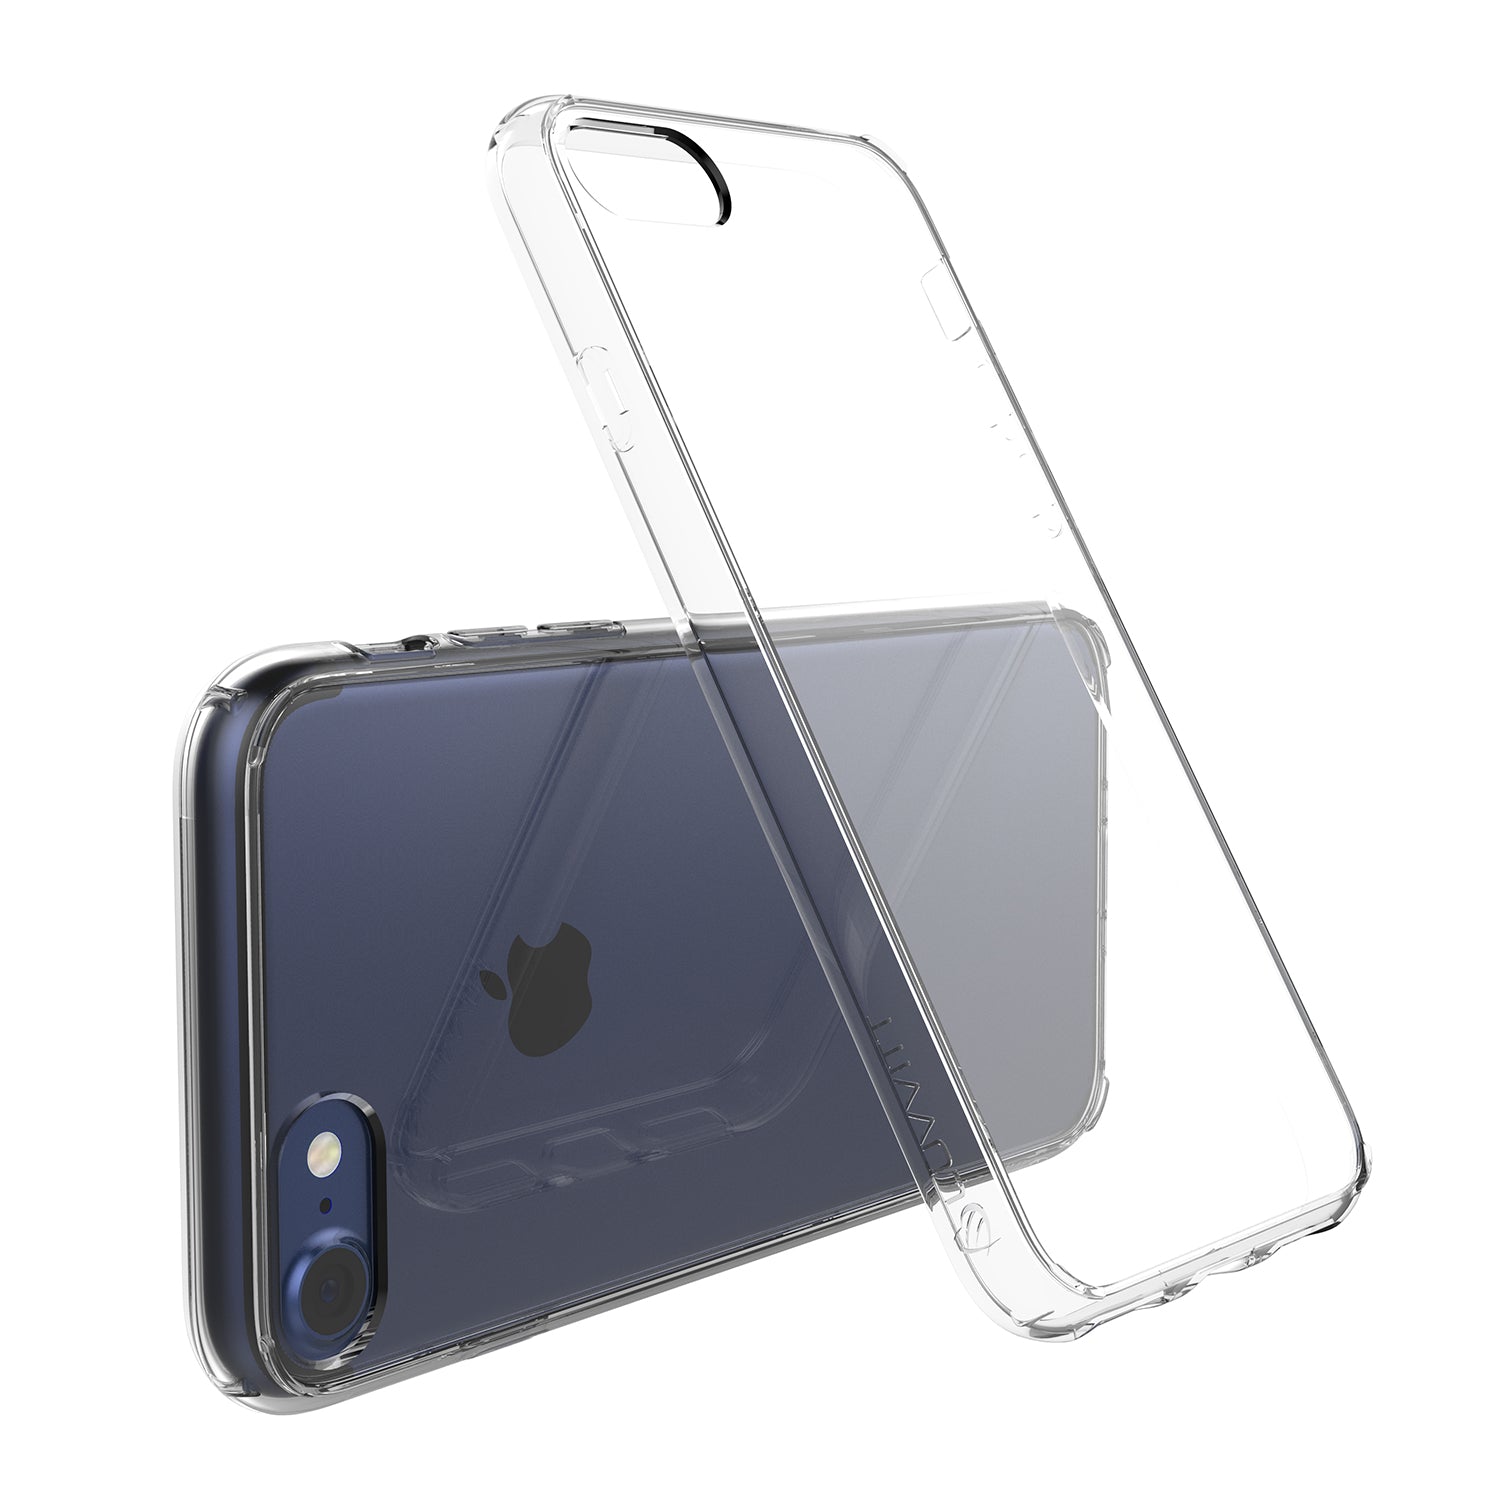 Luvvitt Clear View Hybrid Case for iPhone 8 - Crystal Clear